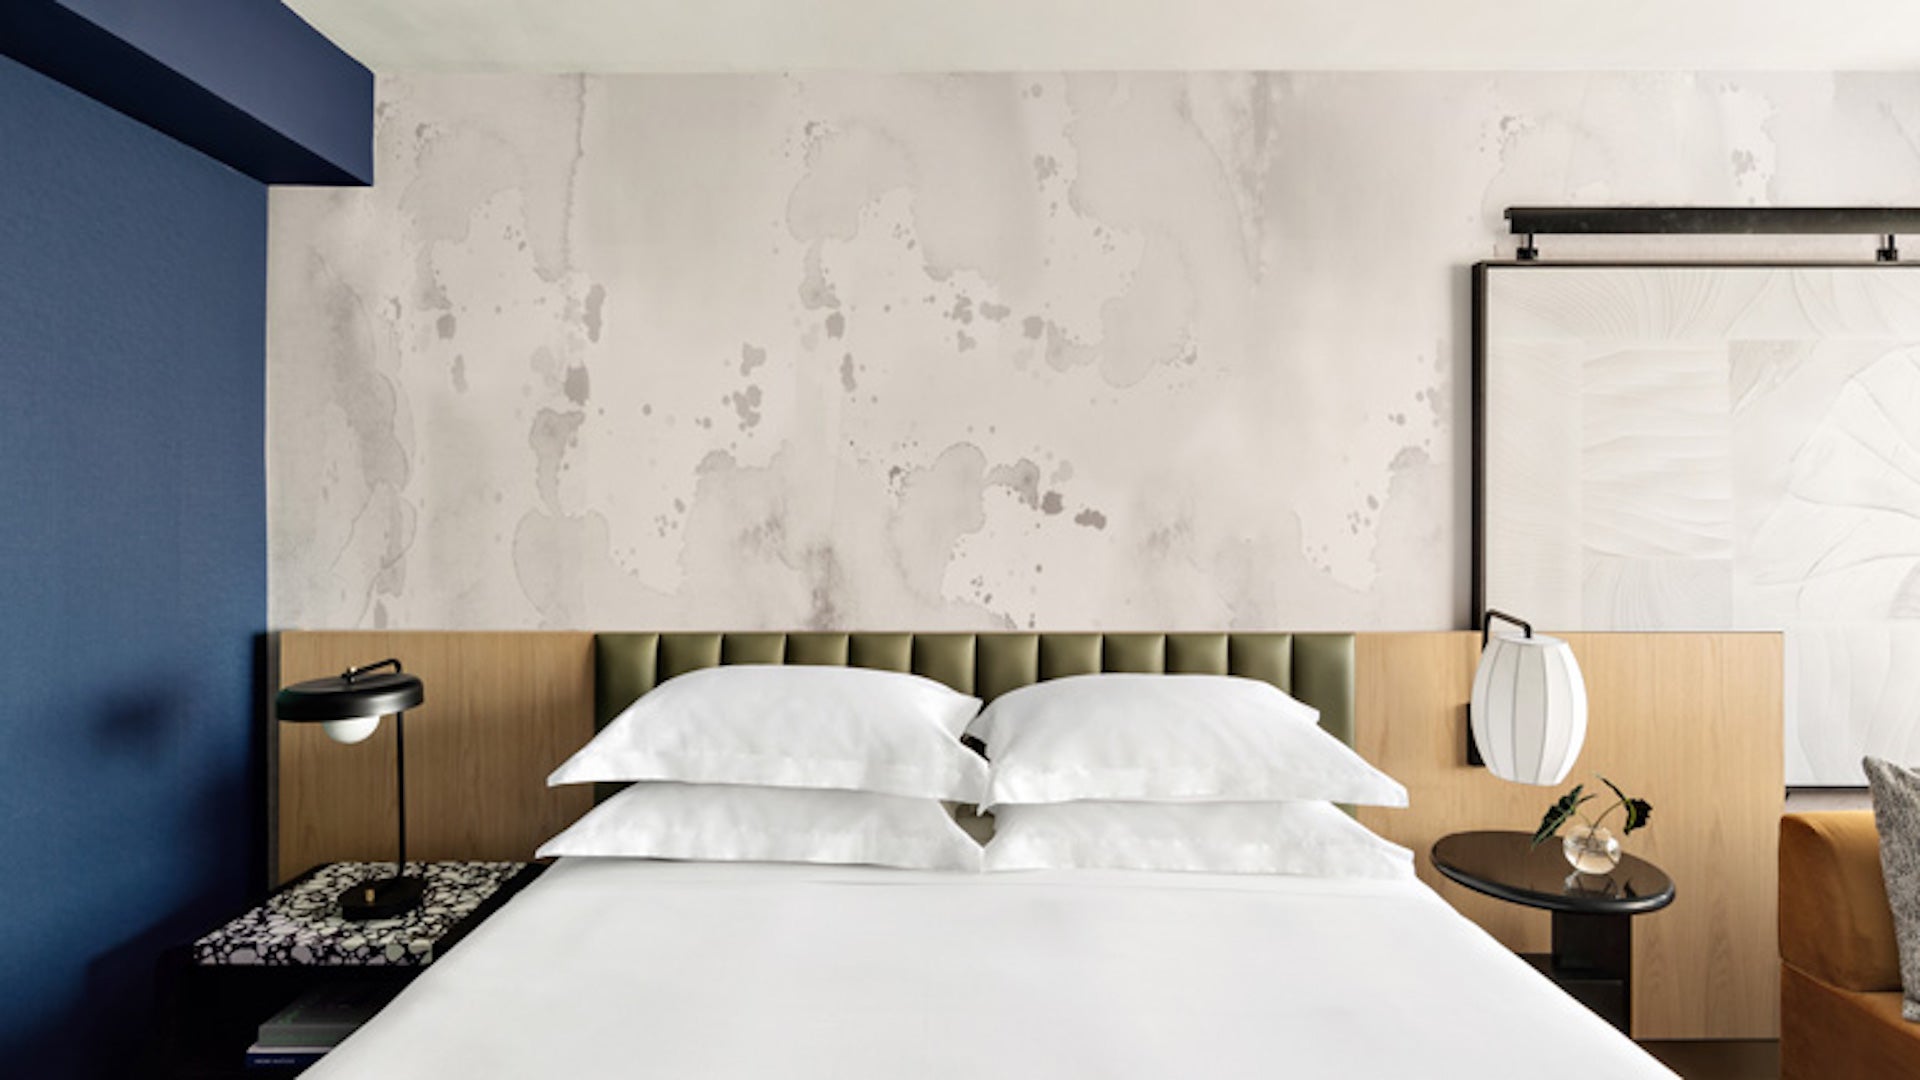 Ihg Hotels And Resorts Announces Kimpton Hotel Theta Opening In Fall 2023 In New York City Image 01 